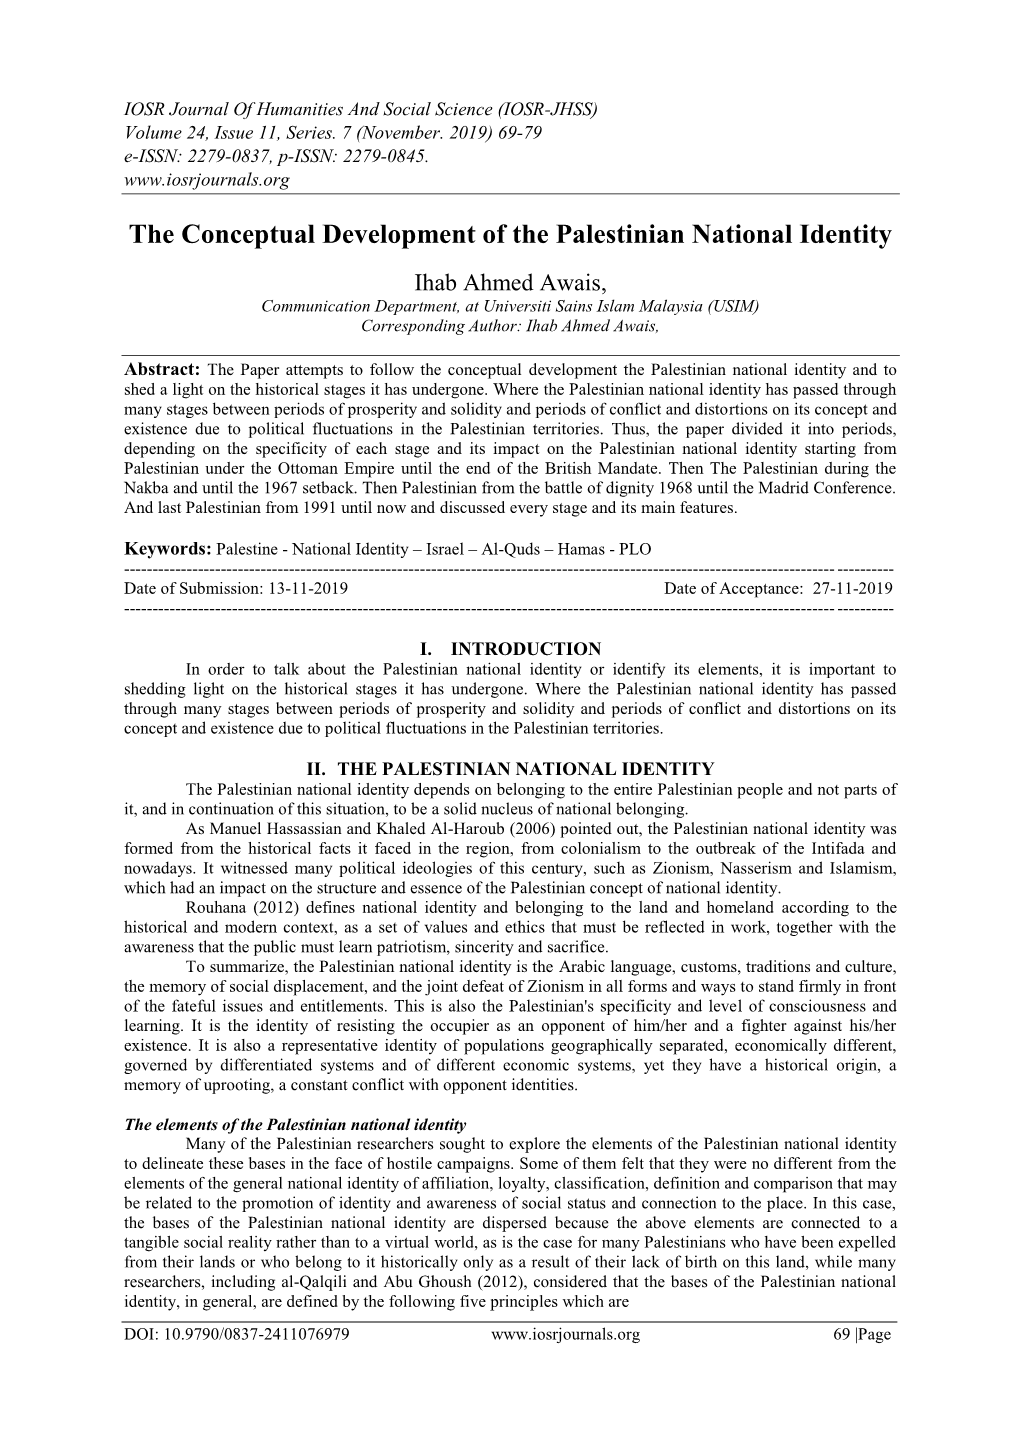 The Conceptual Development of the Palestinian National Identity